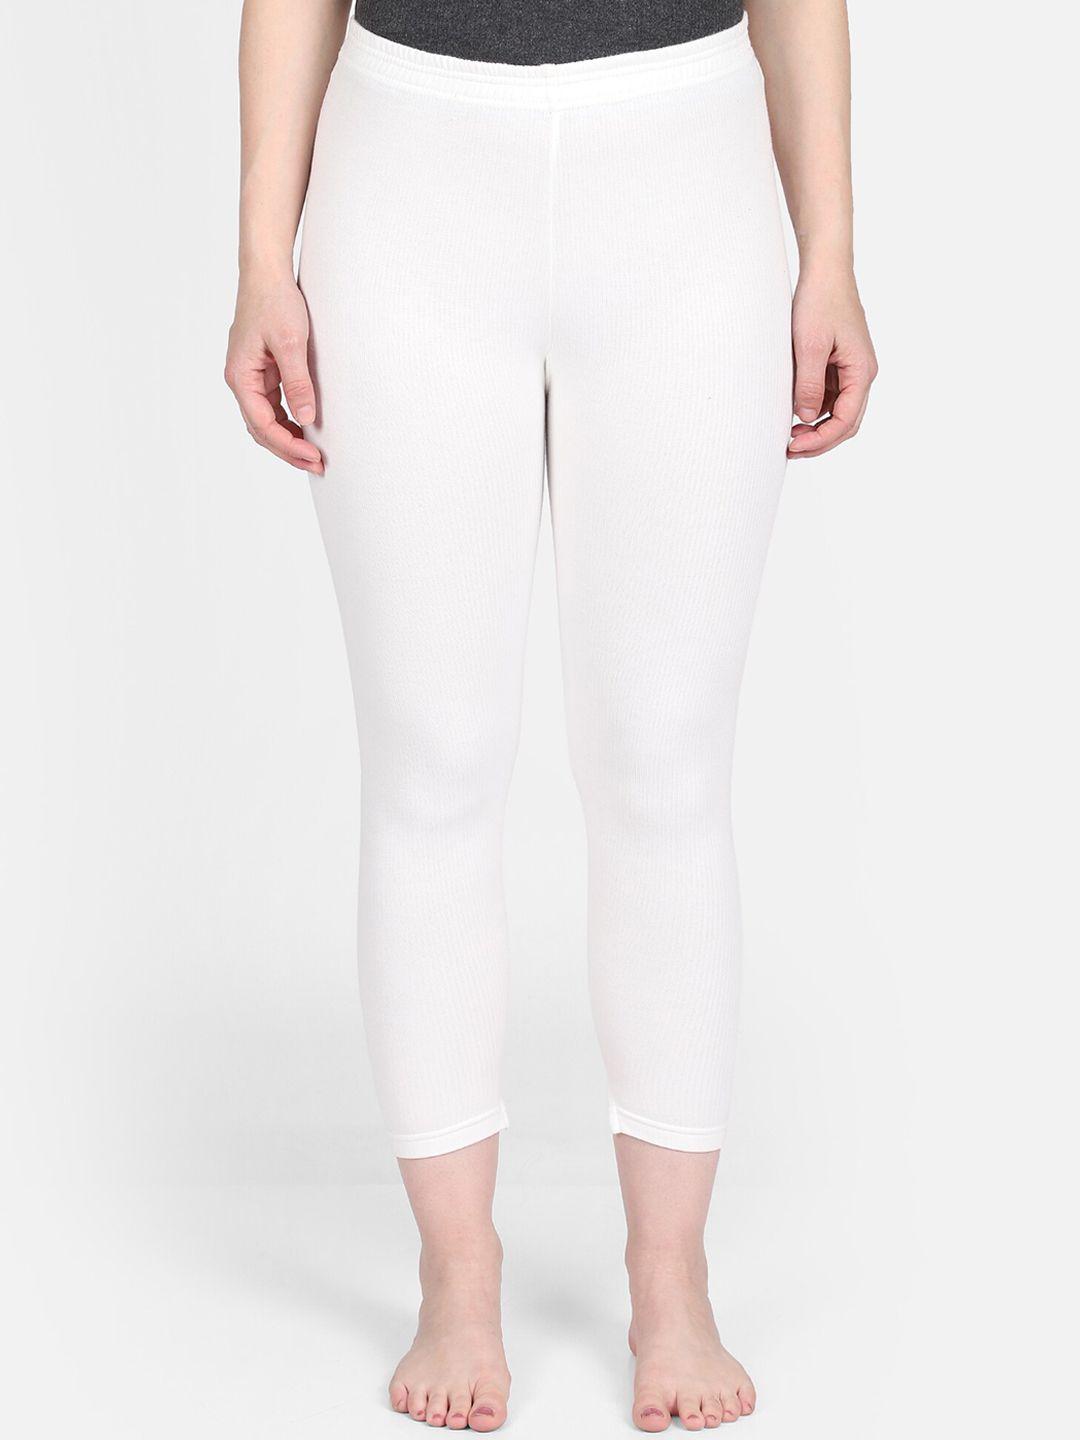 dyca women off-white solid cropped thermal bottom